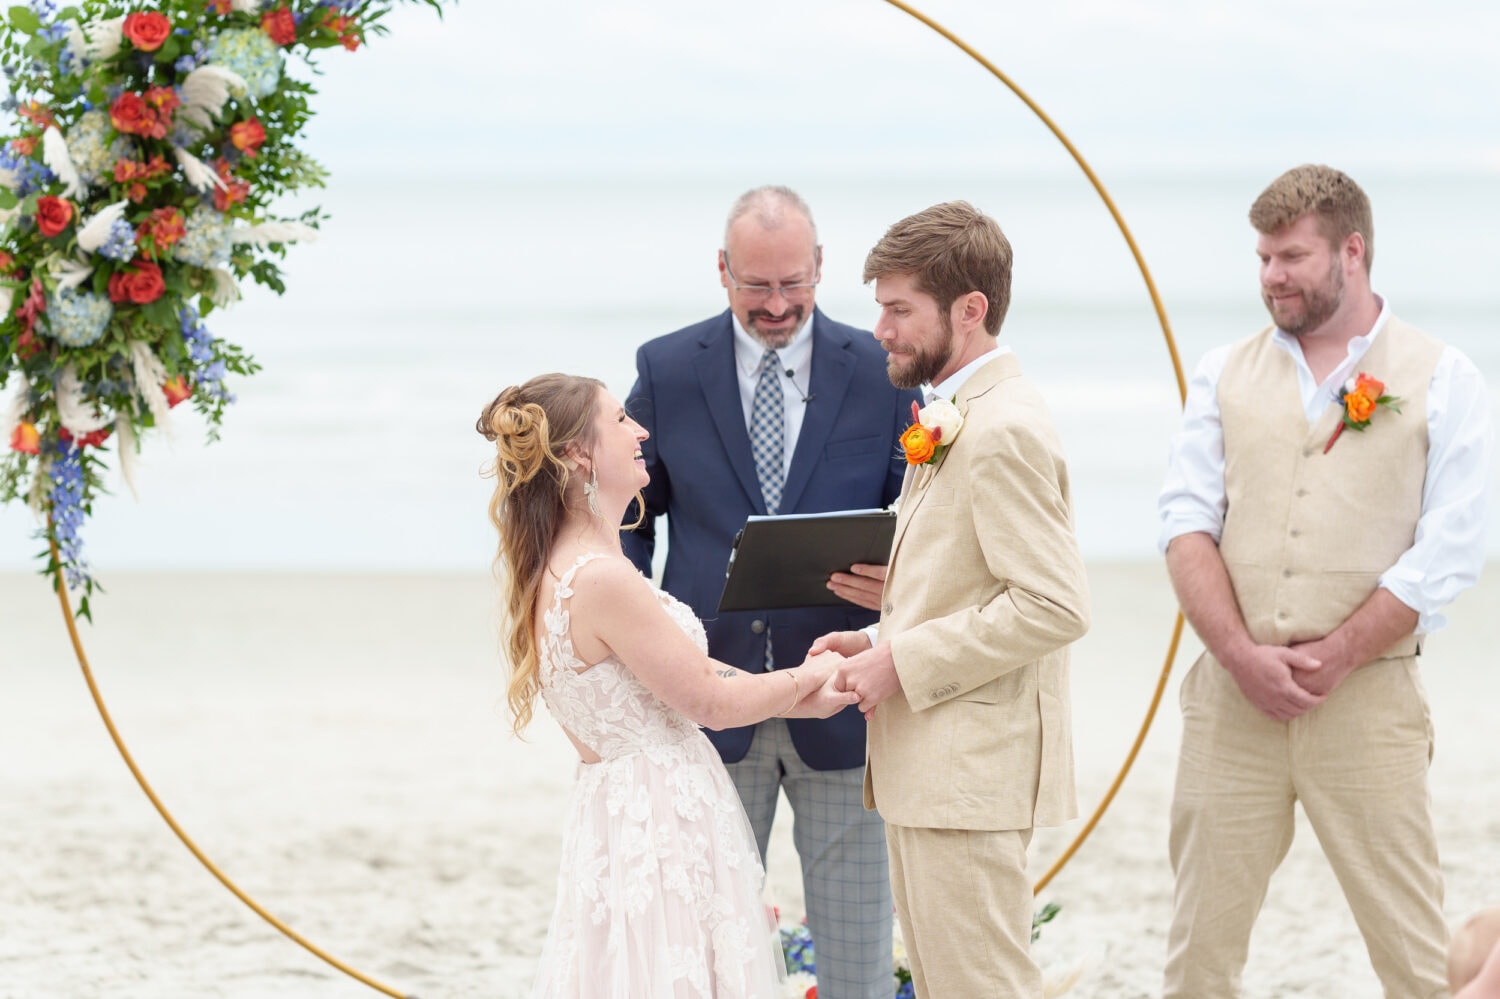 Big smiles during the vows - 21 Main Events - North Myrtle Beach